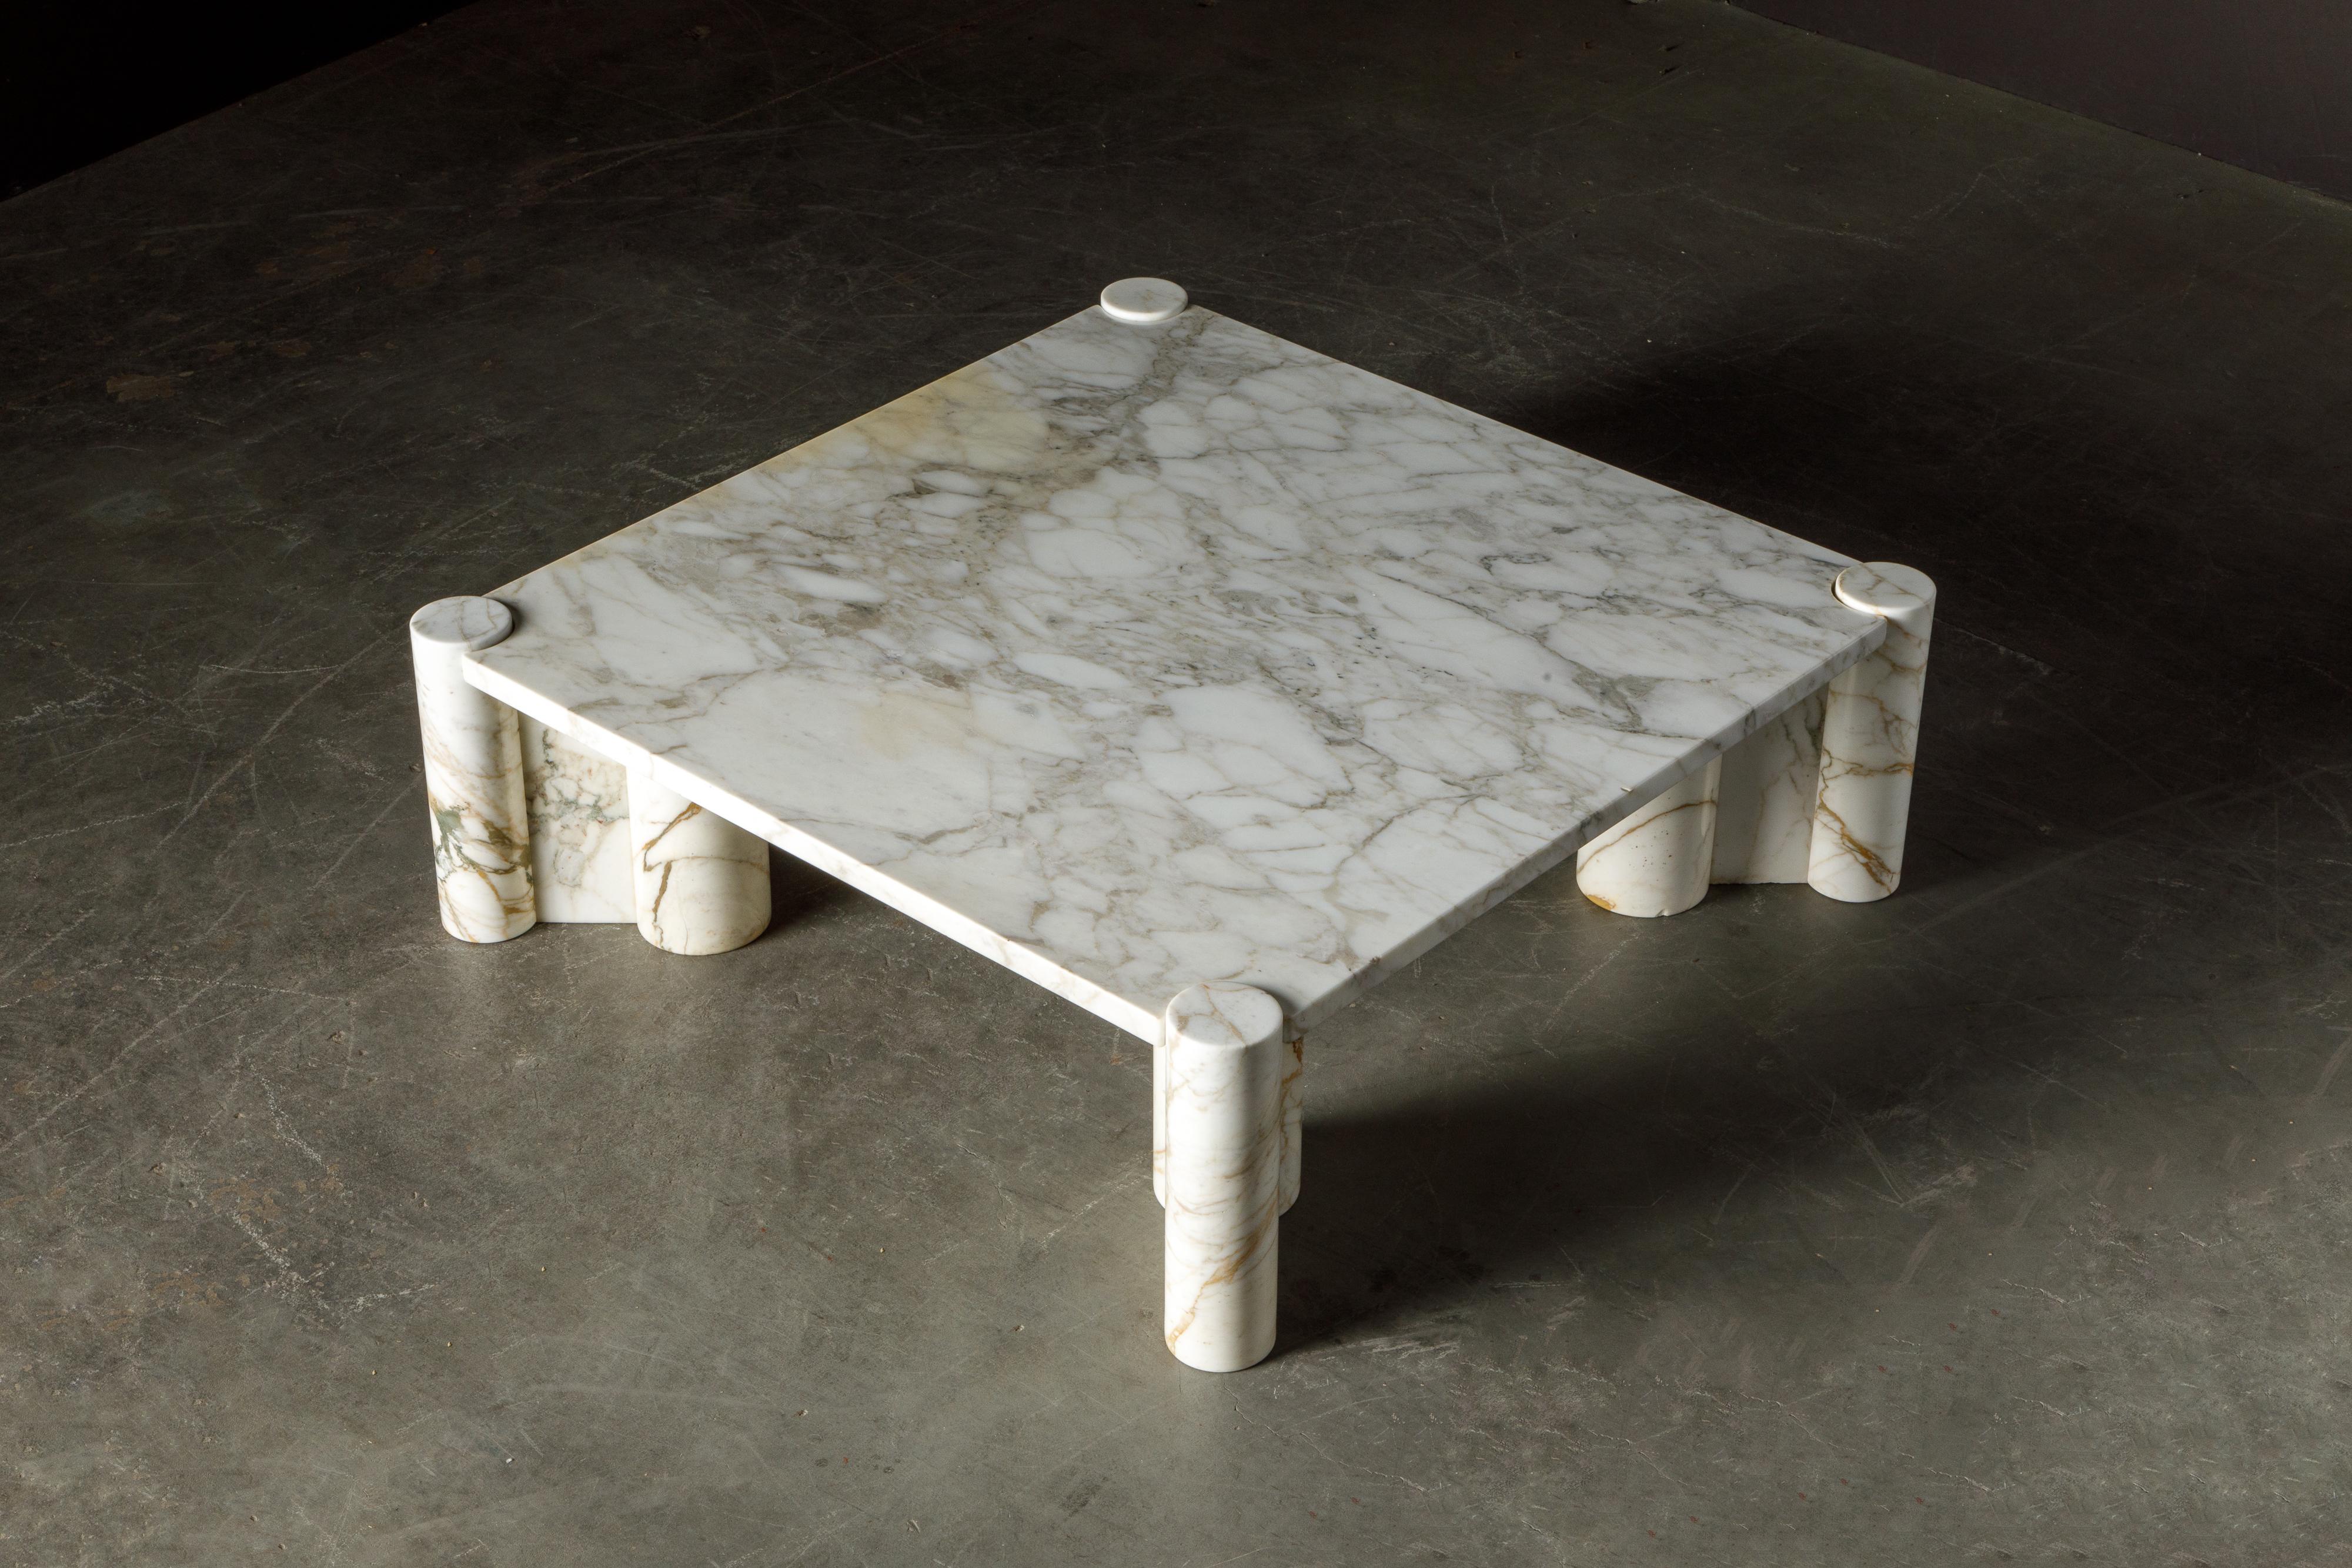 Marble Jumbo Table in Golden Calacatta by Gae Aulenti for Knoll International, c. 1968